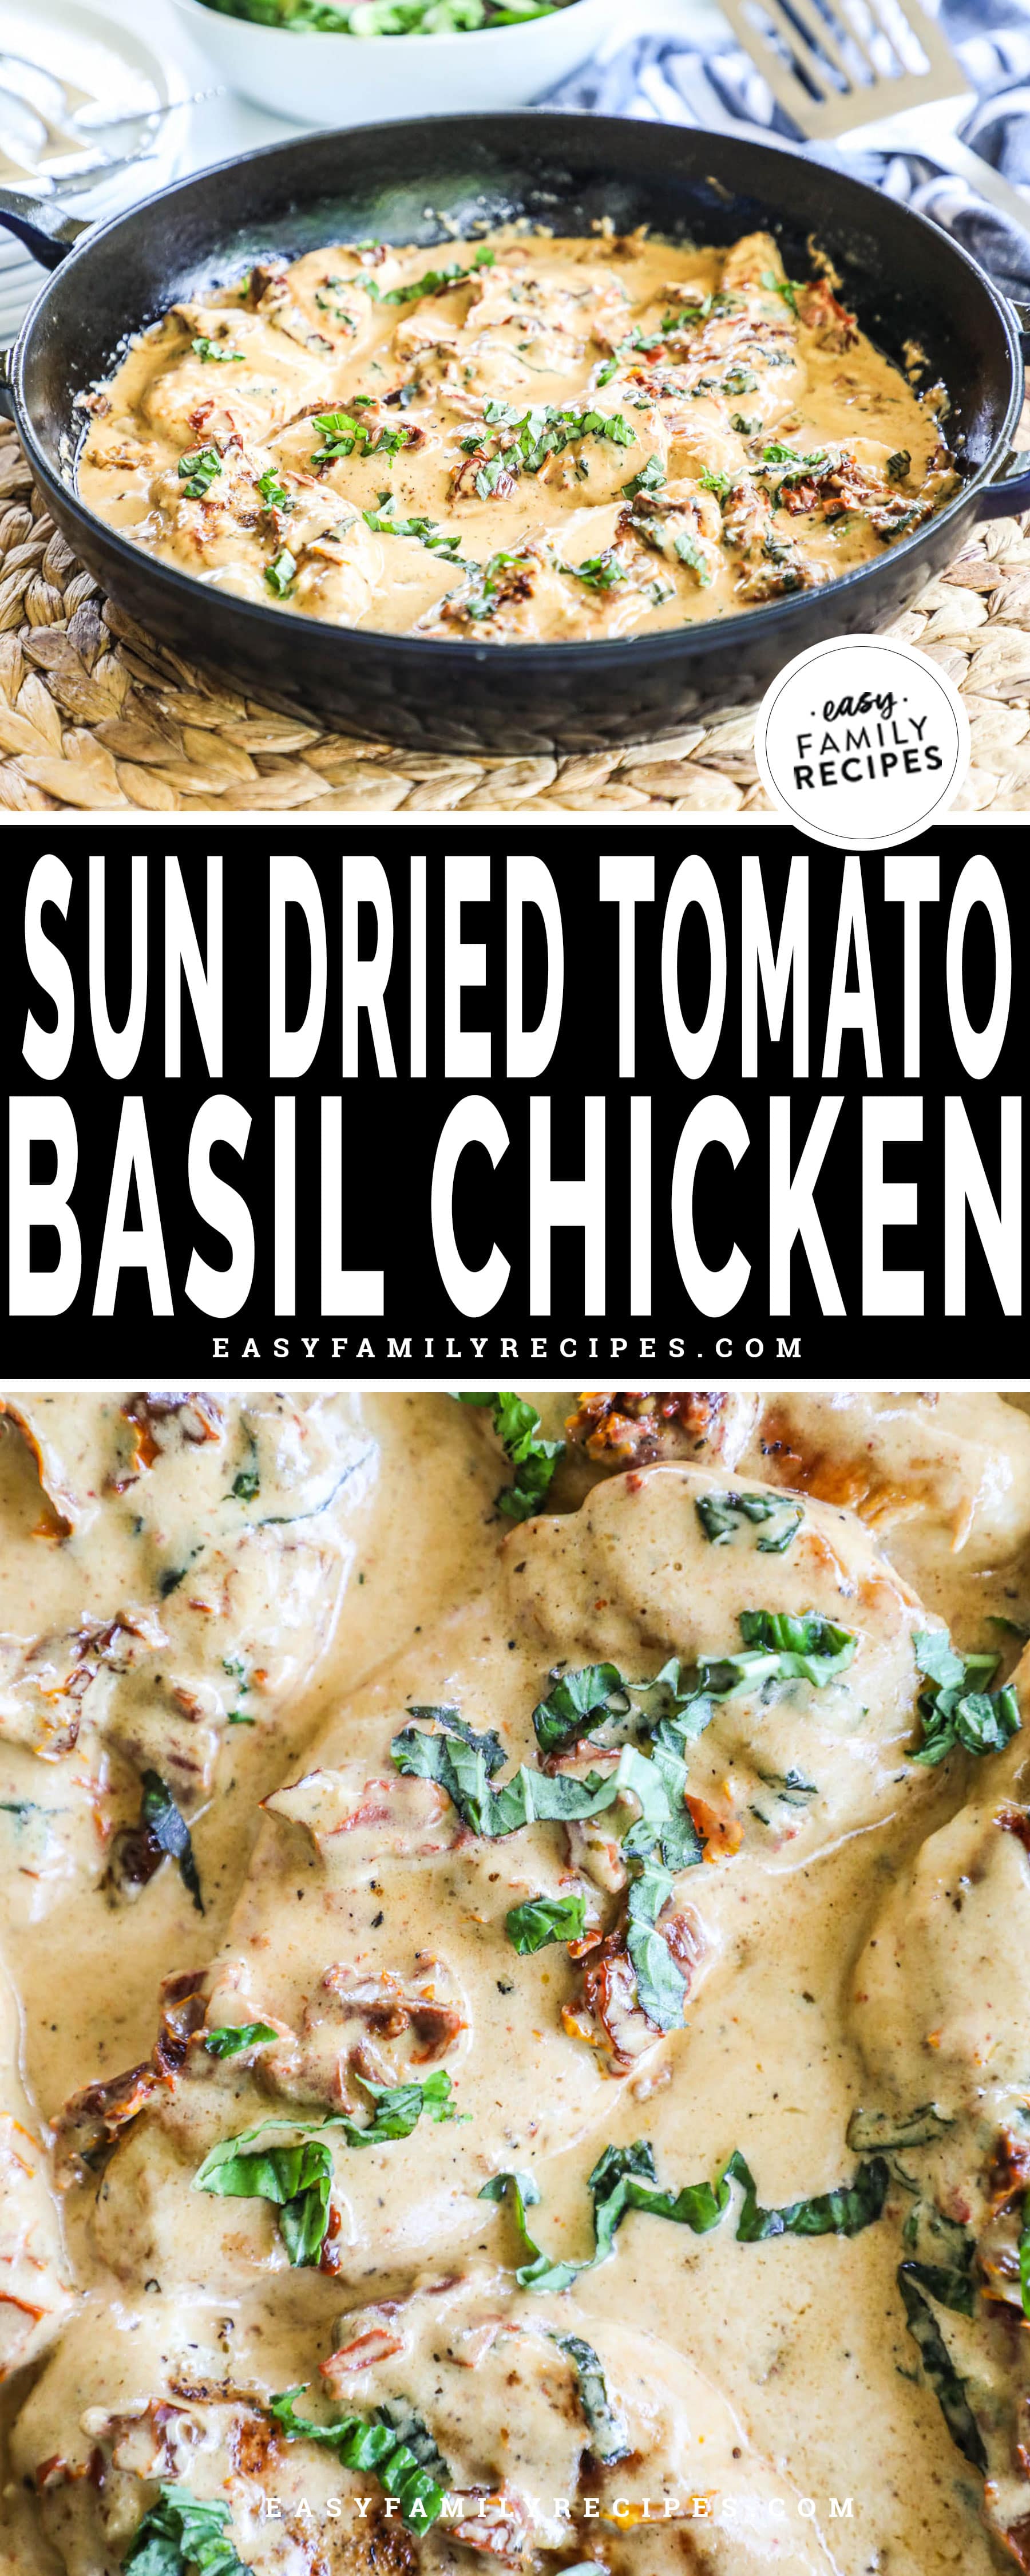 Image collage of a skillet with creamy chicken in it and of a close up of creamy chicken with sun dried tomato and basil garnishing it.